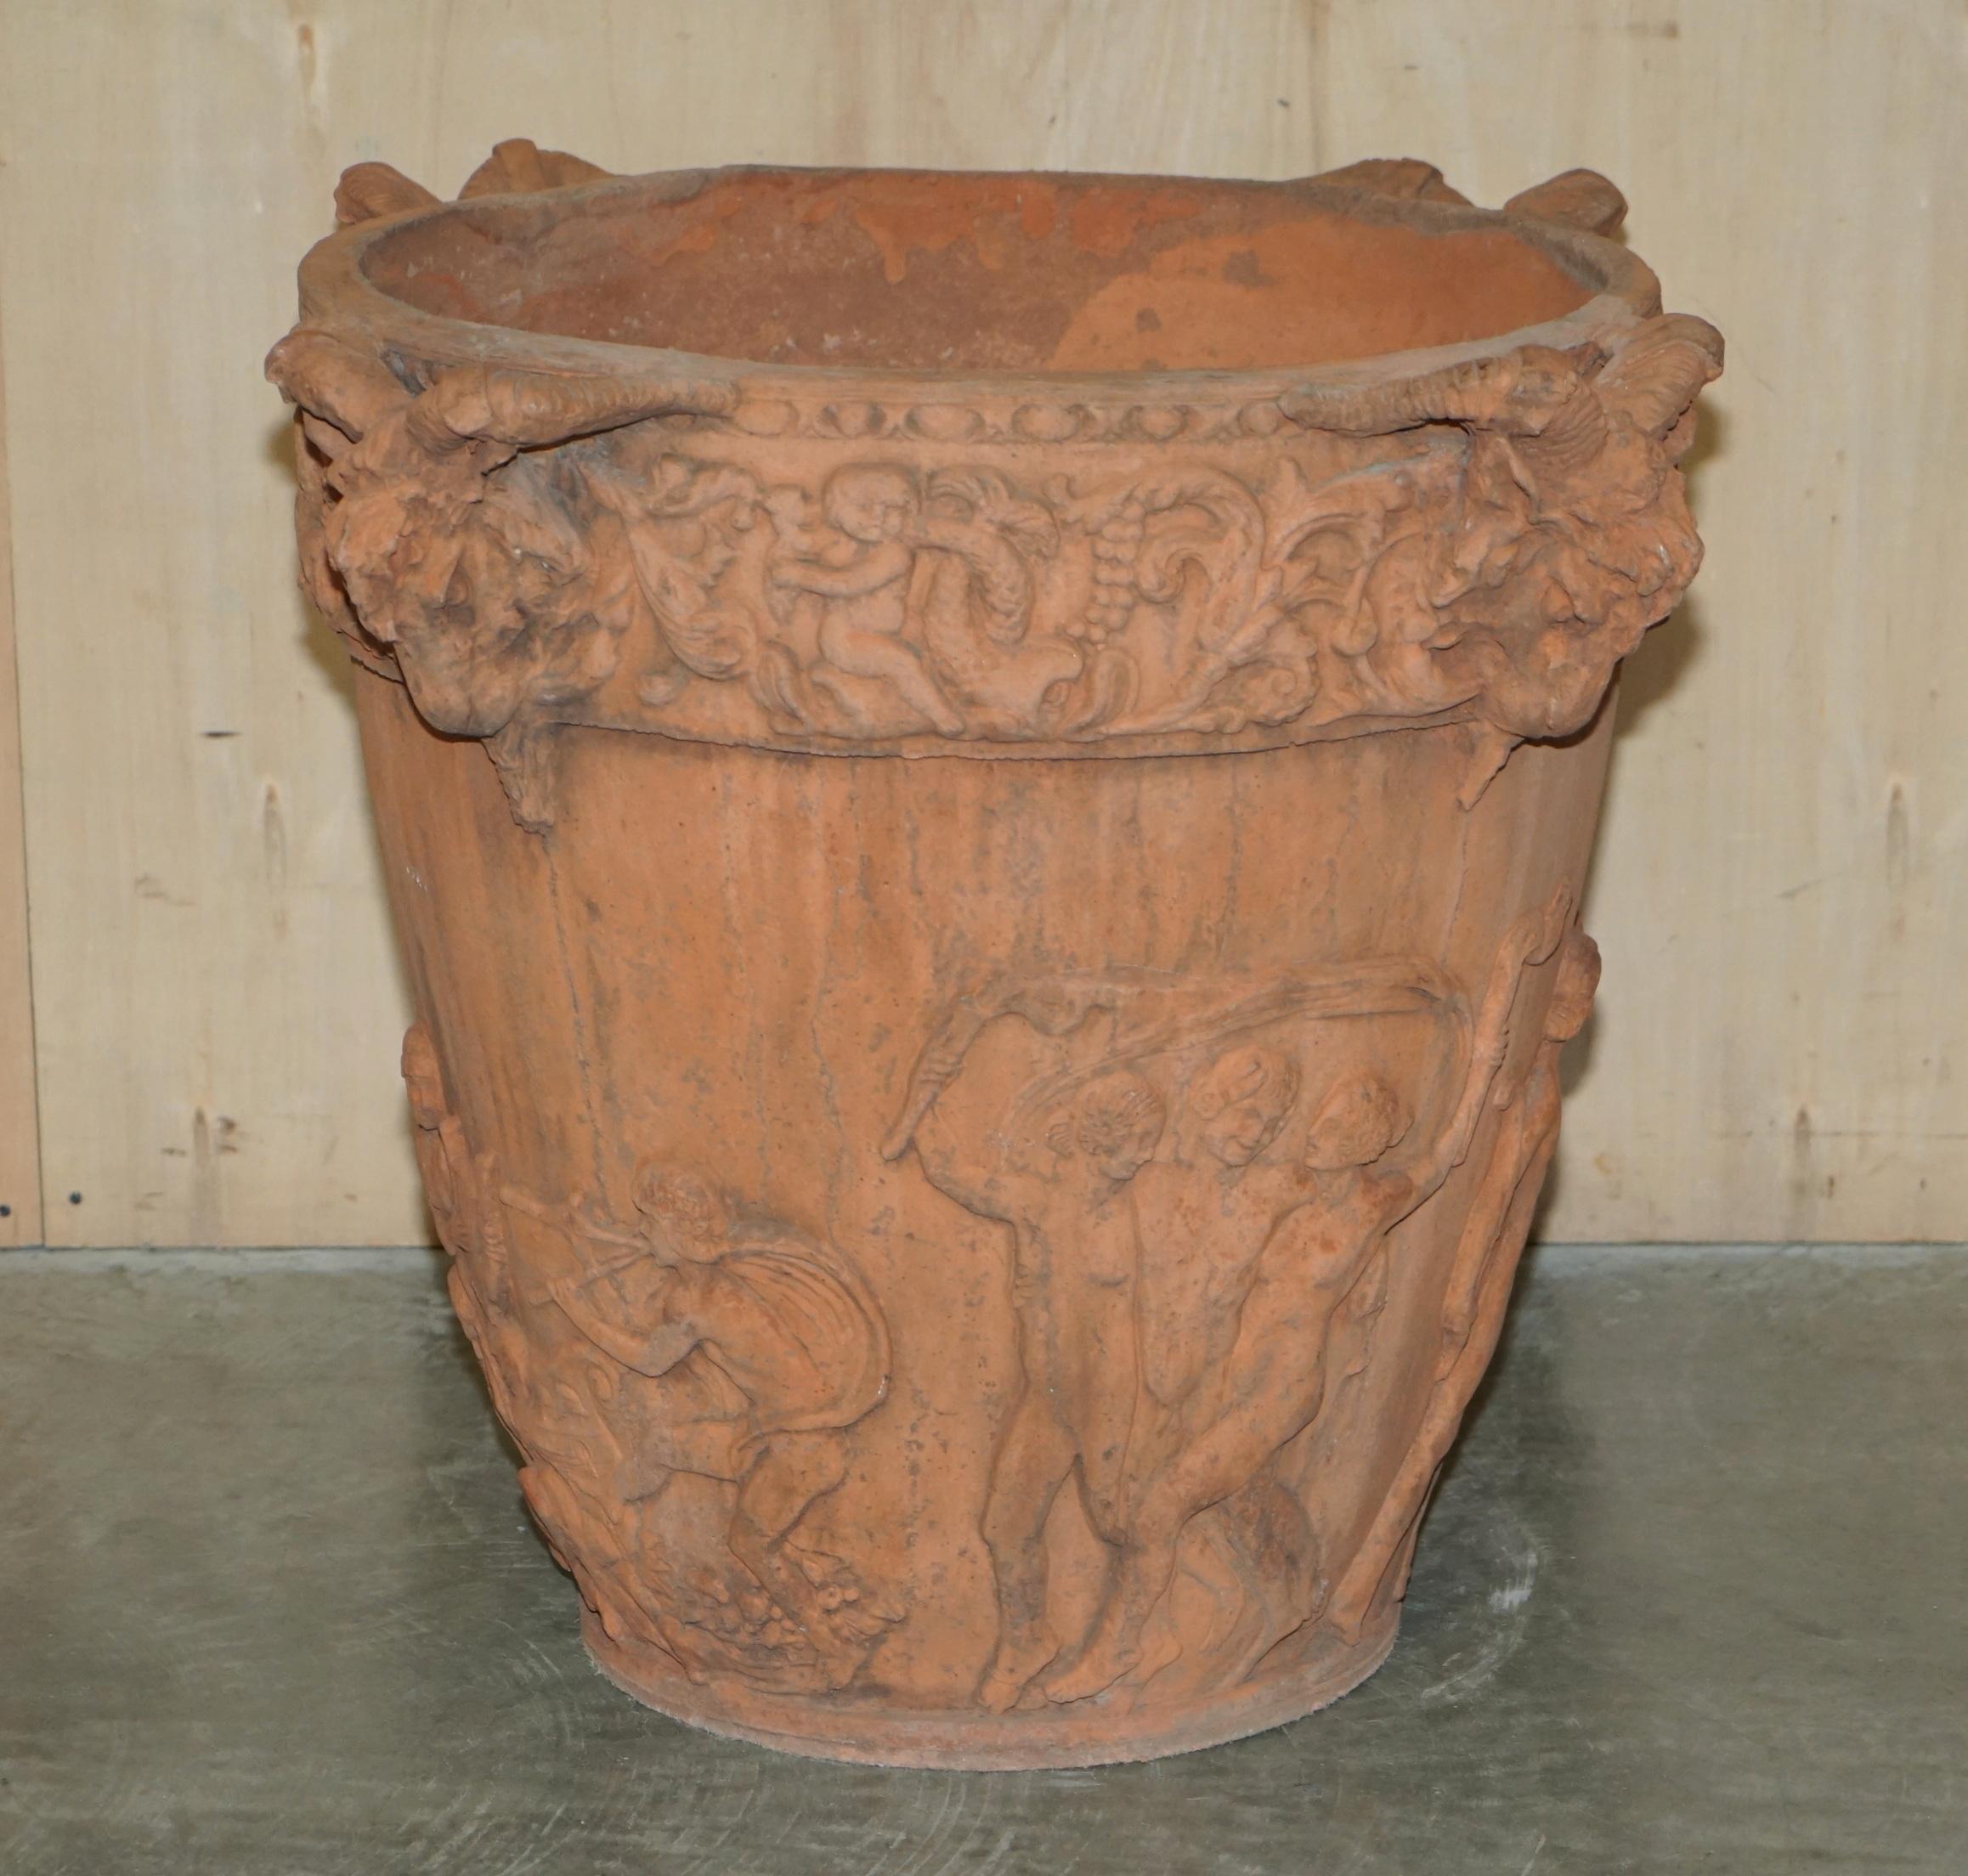 Royal House Antiques

Royal House Antiques is delighted to offer for sale this stunning, very large, antique Terracotta Rams head planter

Please note the delivery fee listed is just a guide, it covers within the M25 only for the UK and local Europe